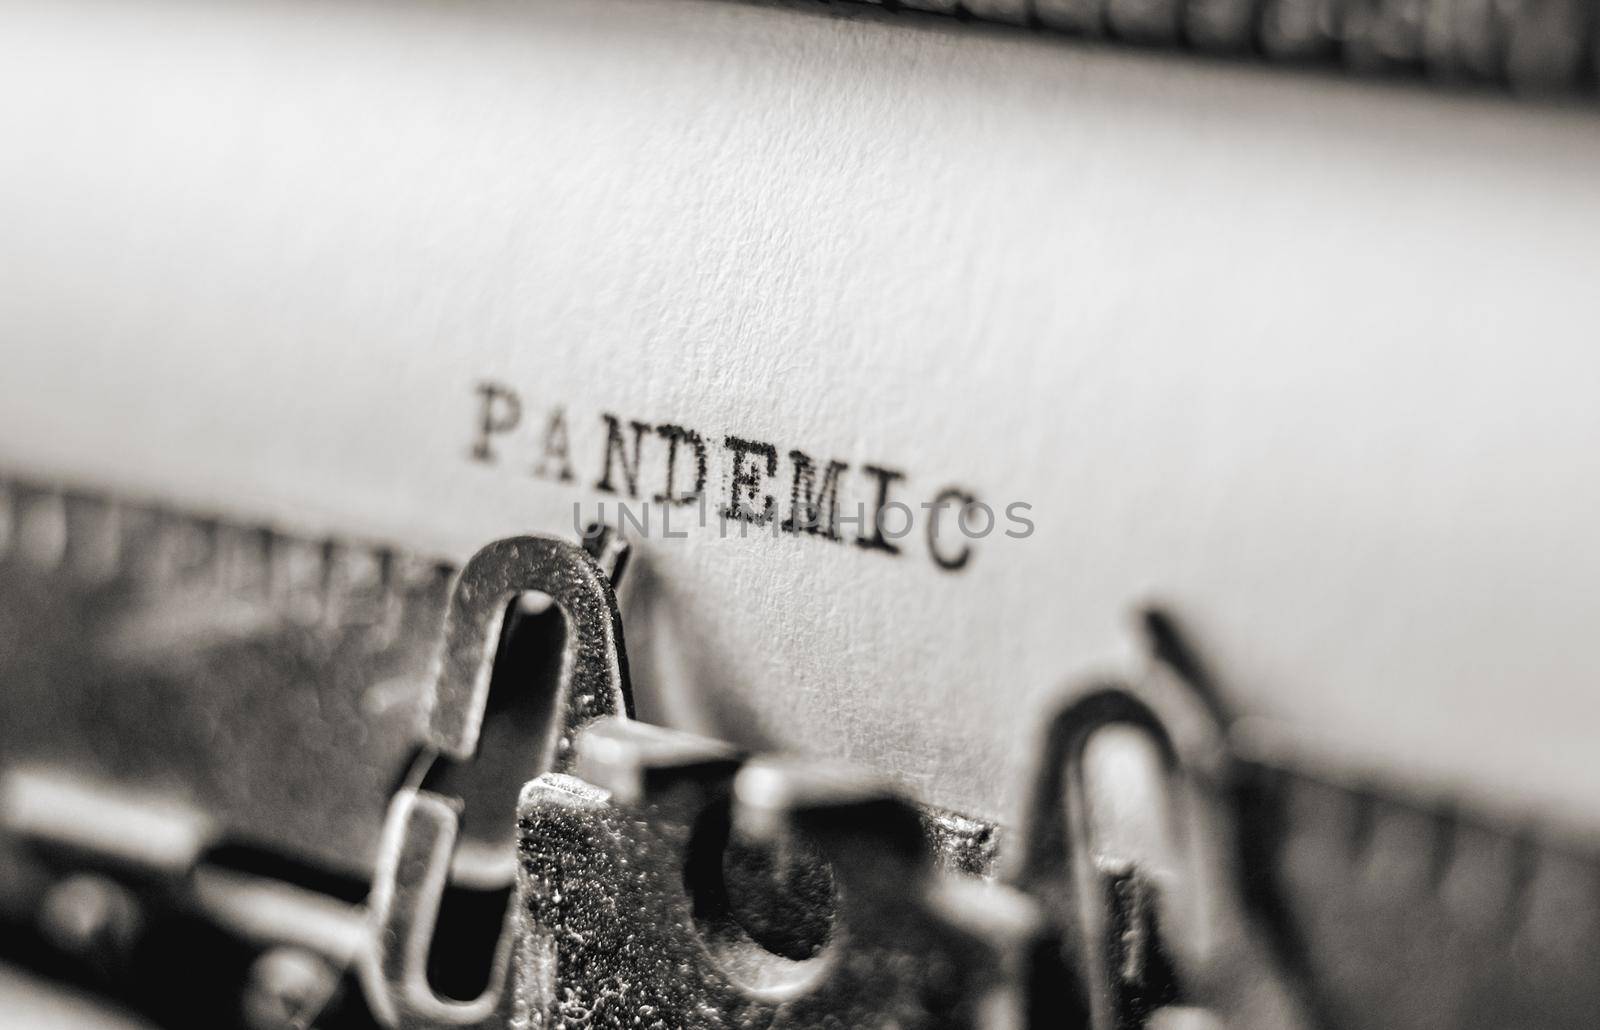 Text Pandemic printed with black inks on old white paper on retro typewriter with typographic font